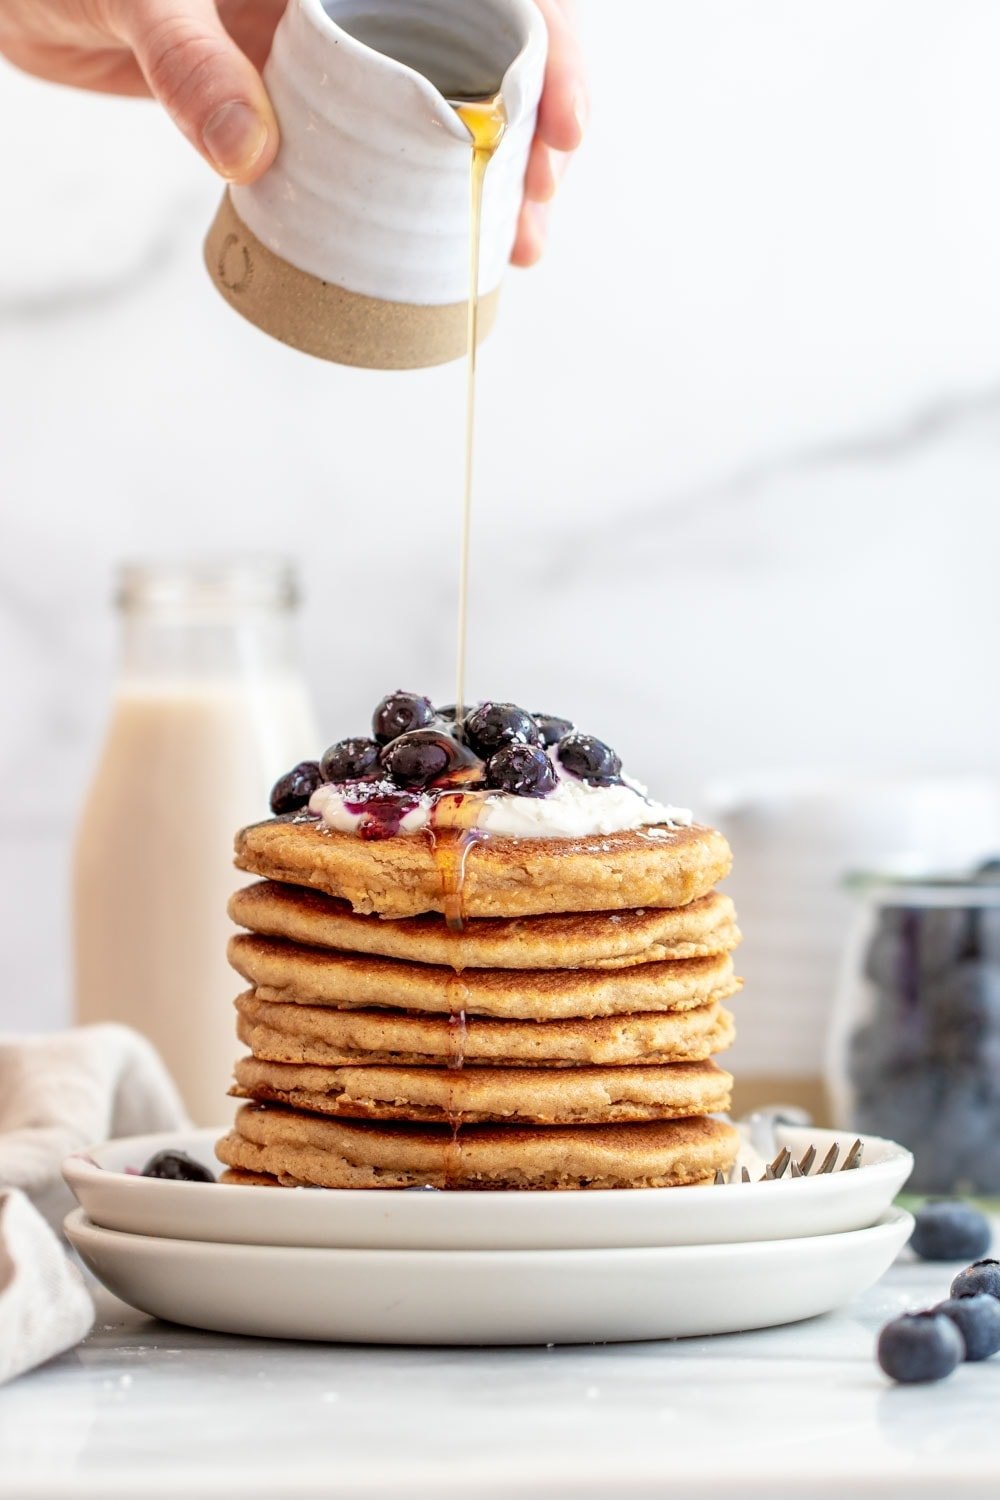 Pancake recipe stacked on a plate made with almond flour.